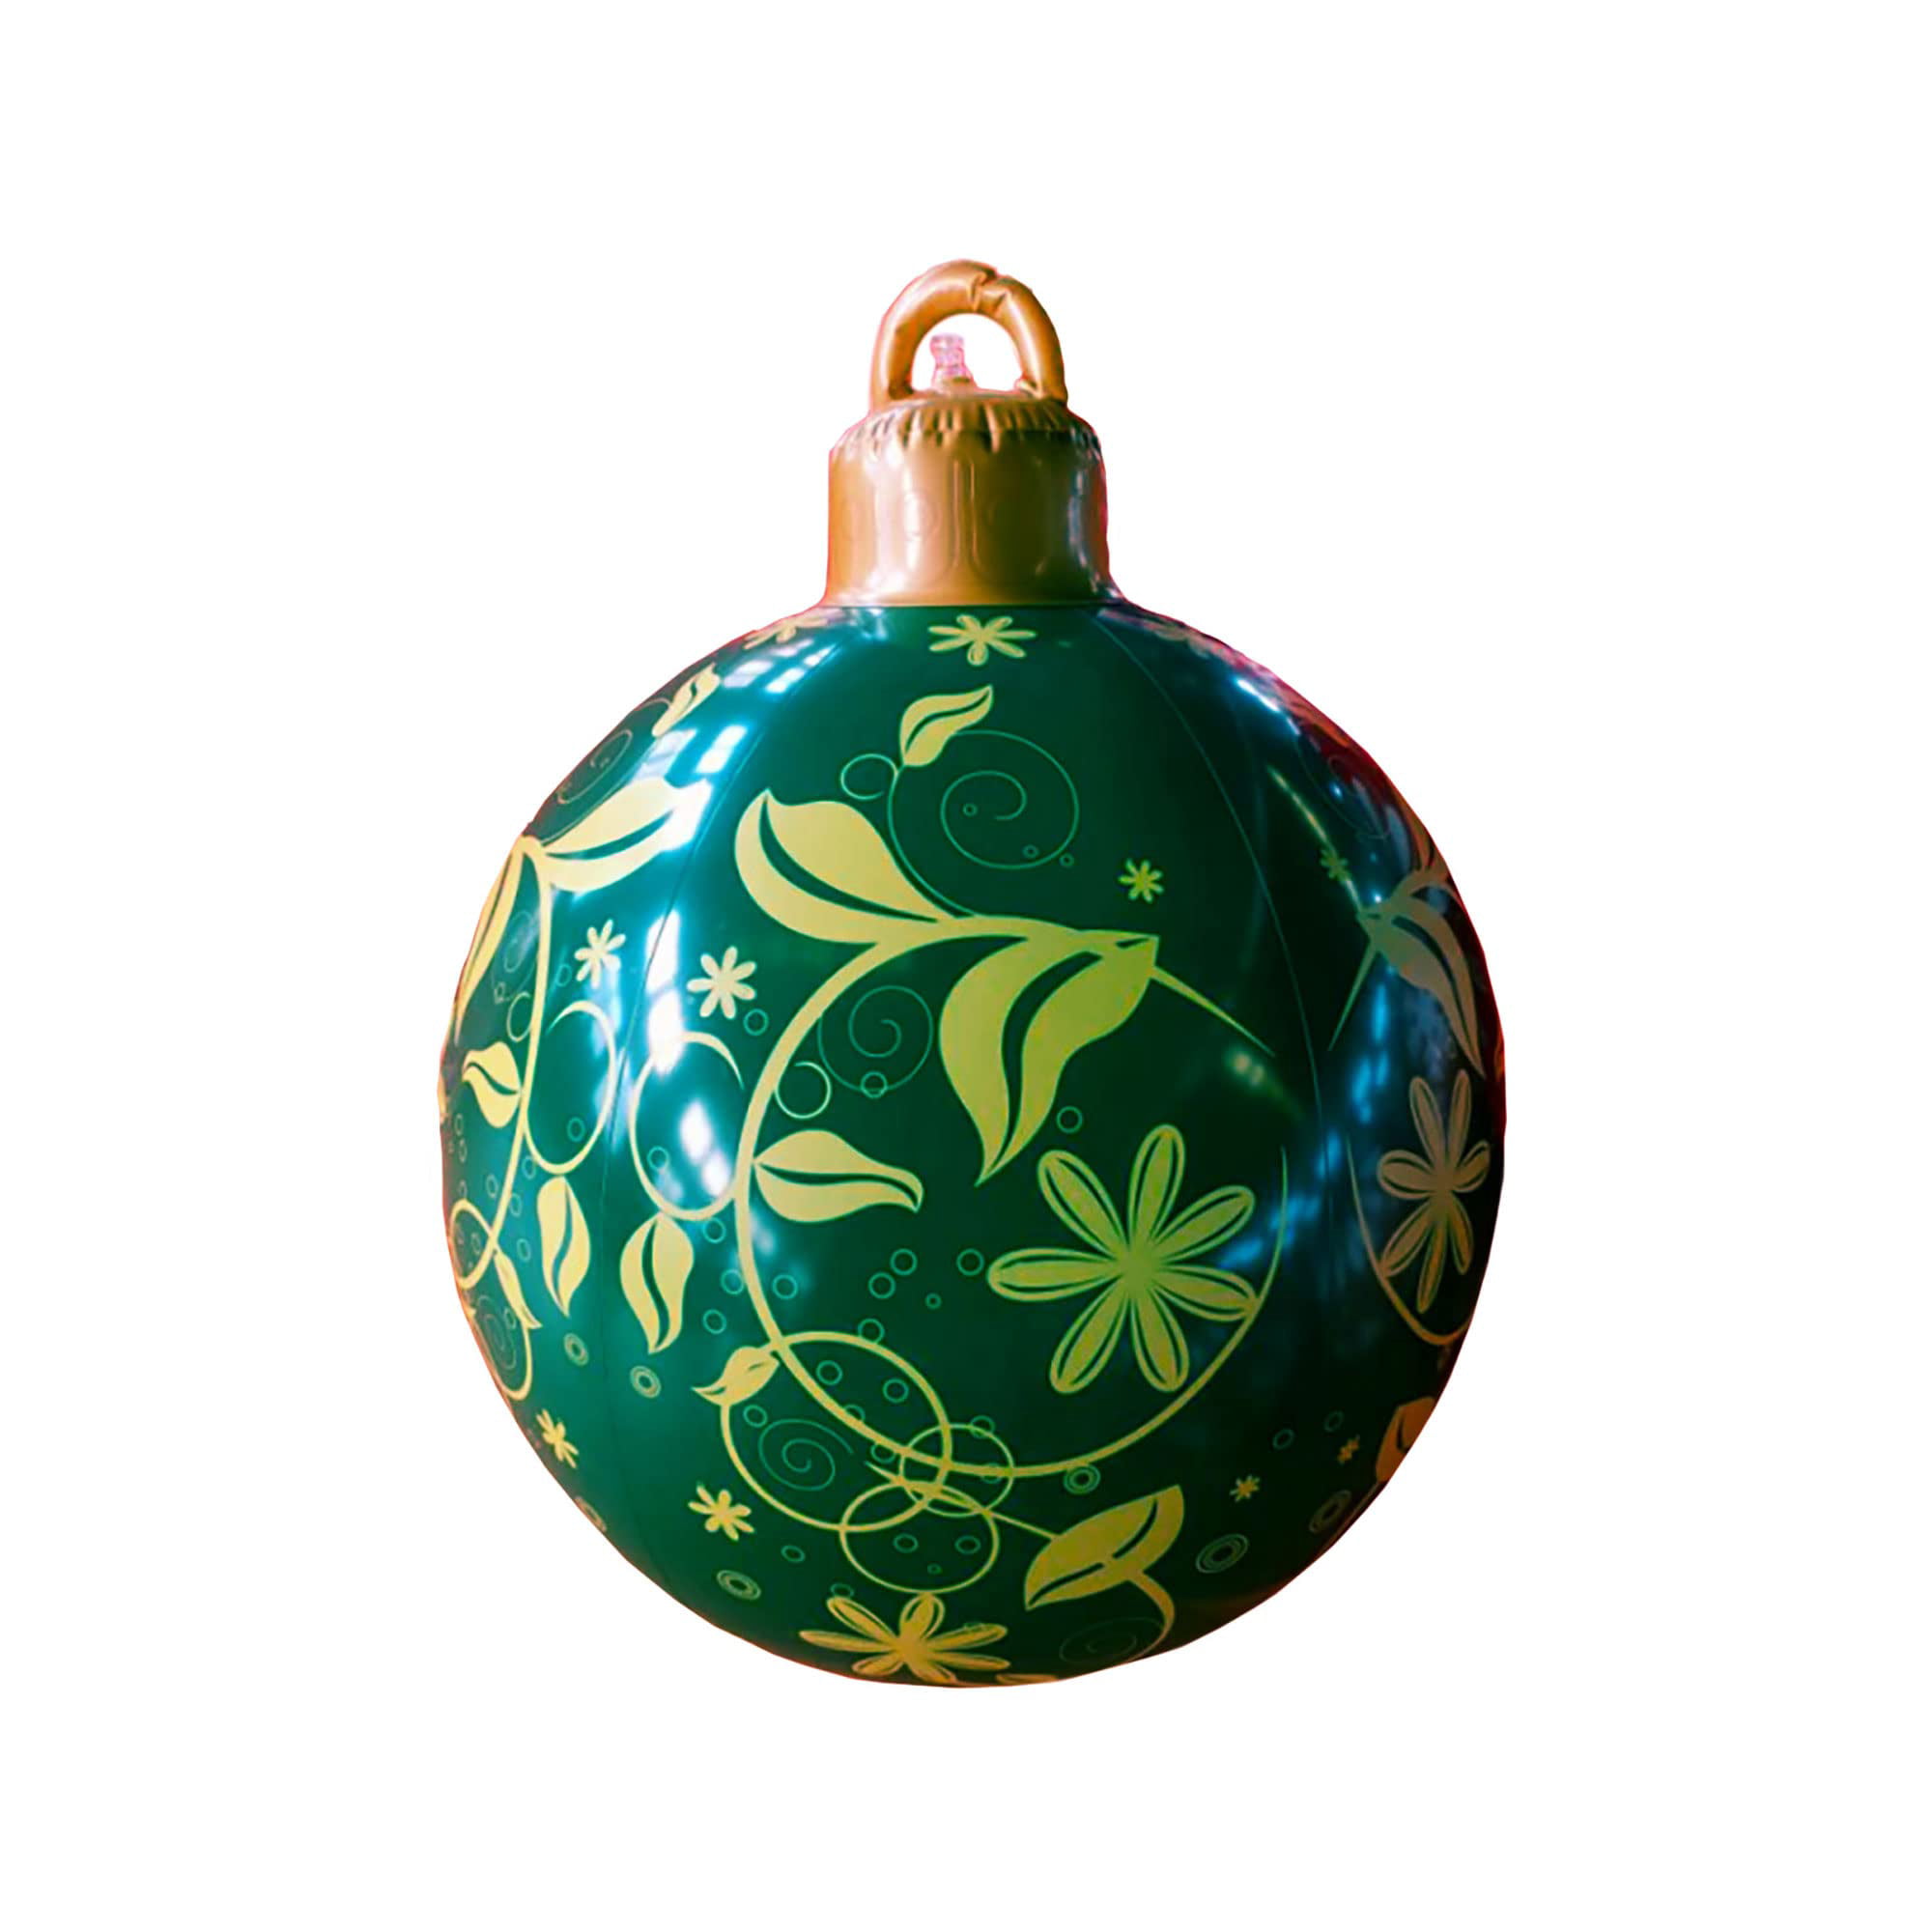 Outdoor Christmas PVC Inflatable Decorated Ball,Giant Christmas ...